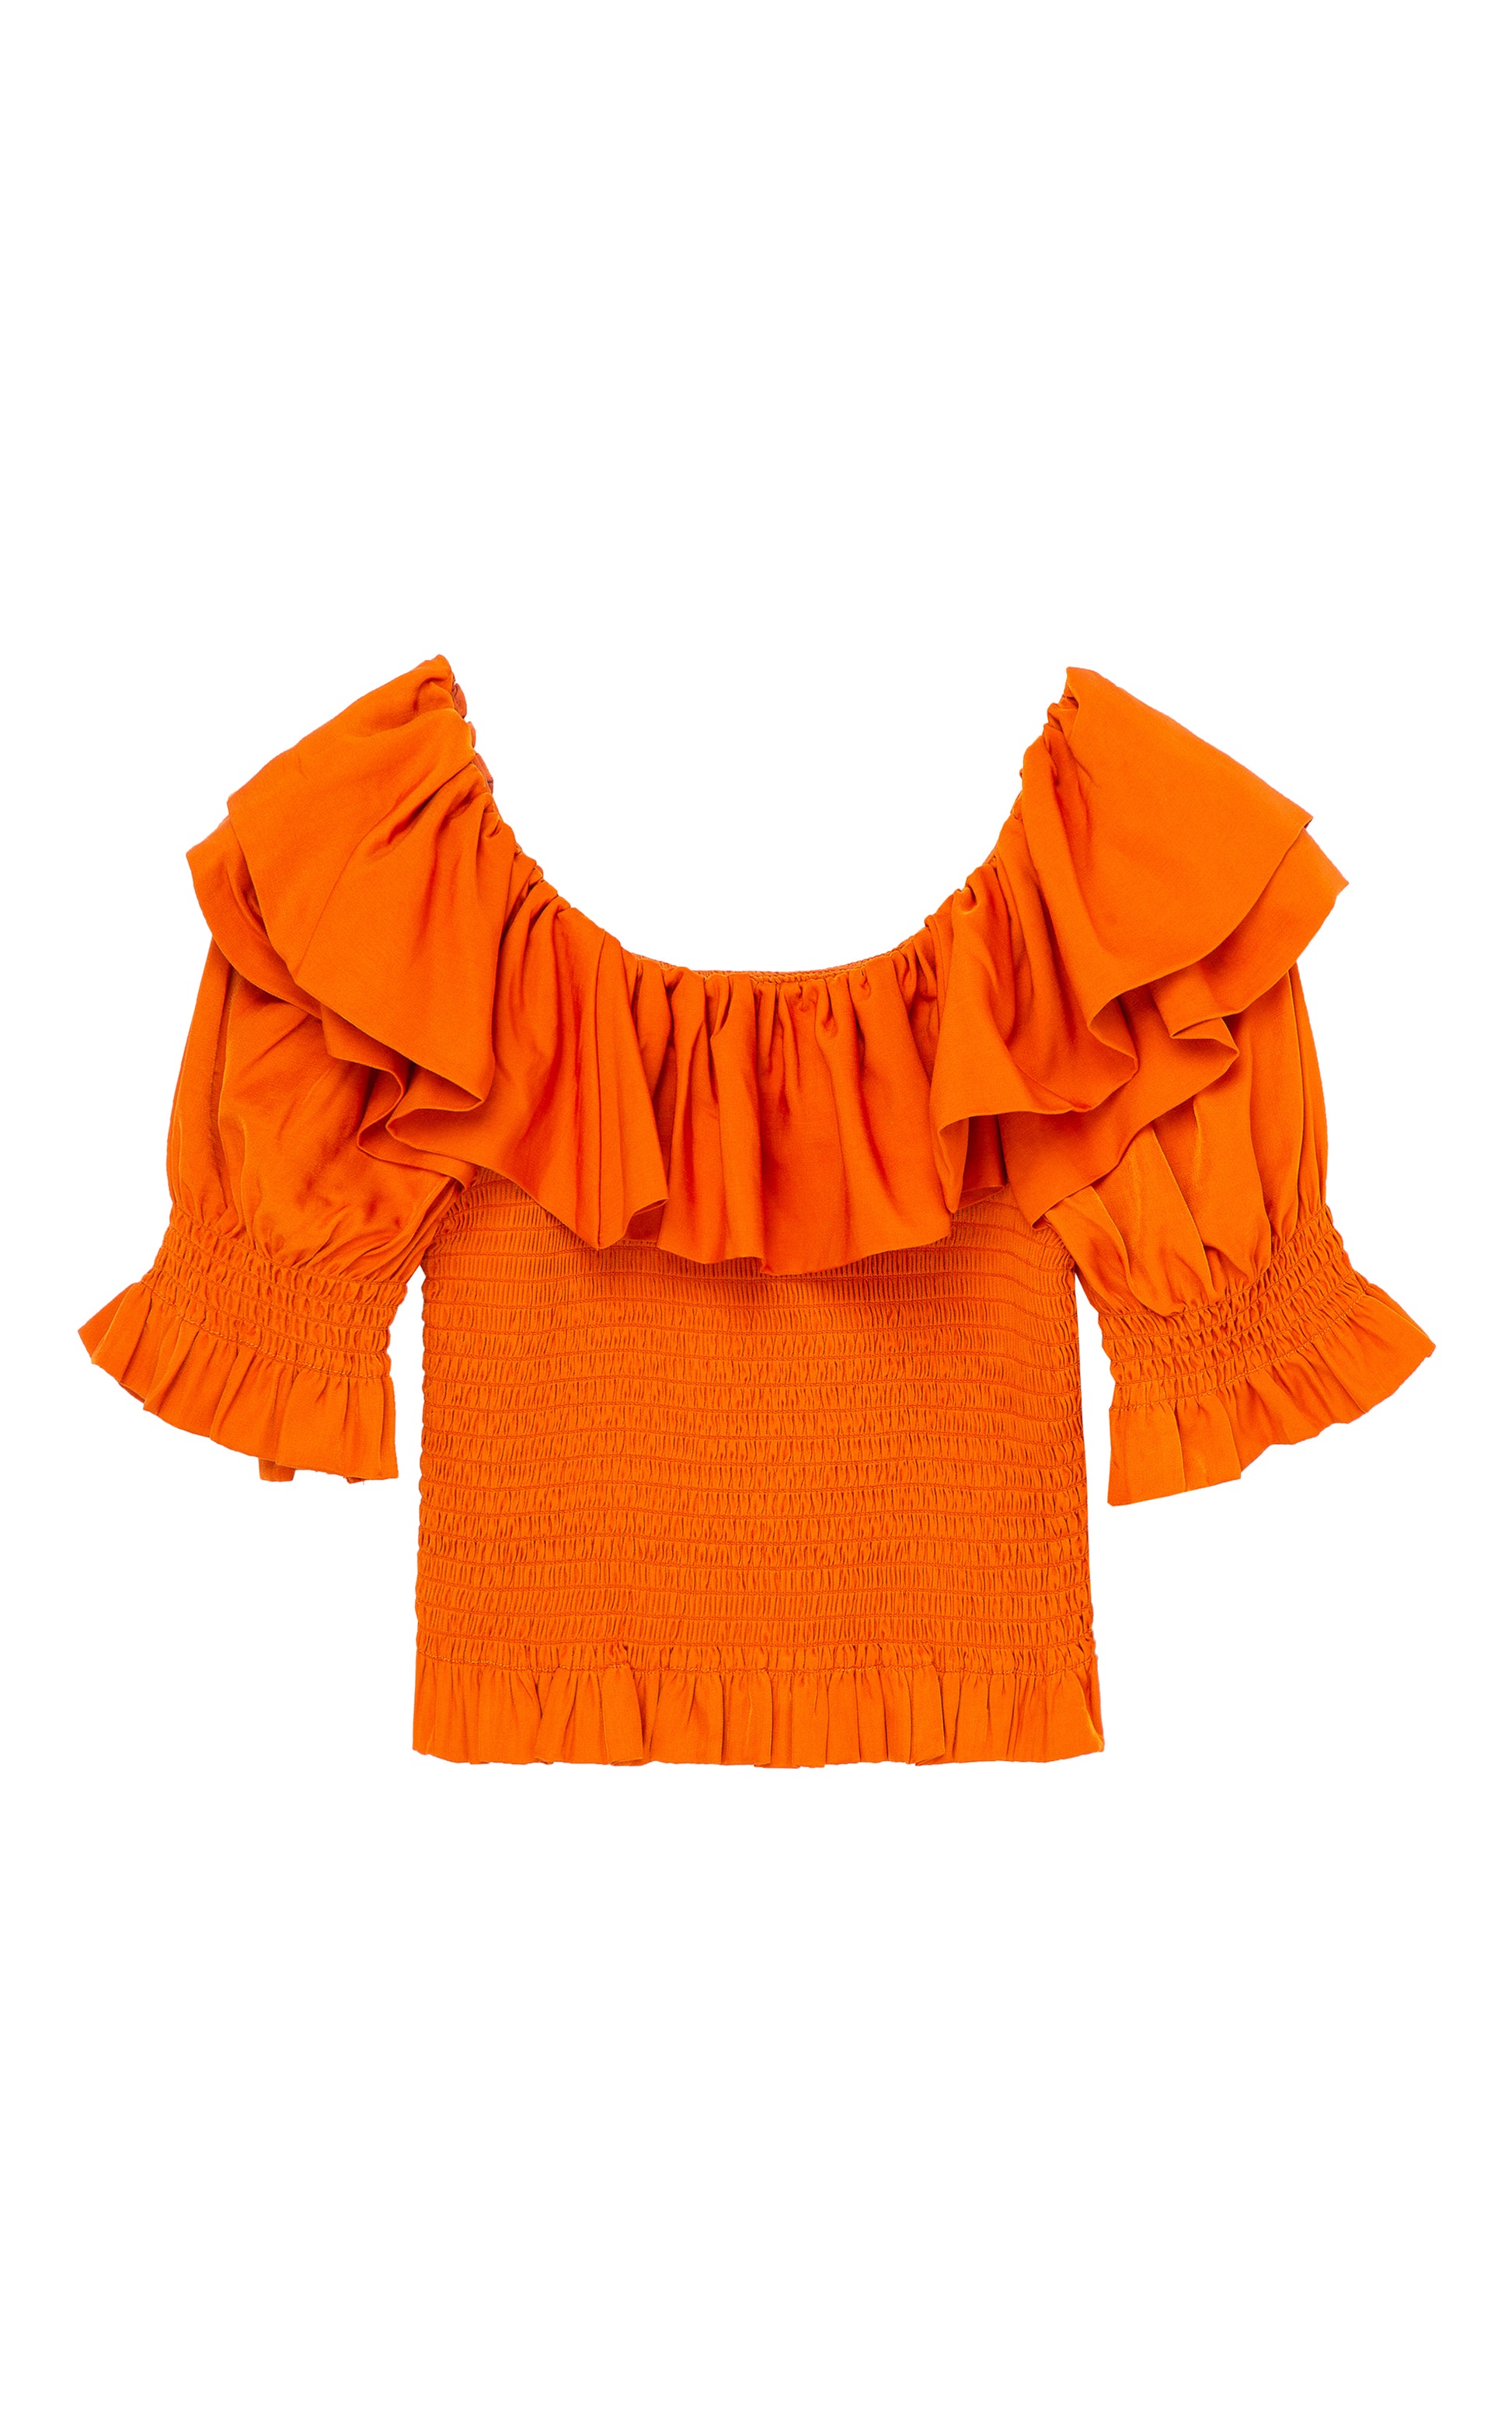 ORANGE-RED THREE-QUARTER-LENGTH SLEEVE TOP WITH A WIDE RUFFLED NECKLINE AND A SMOCKED BODICE